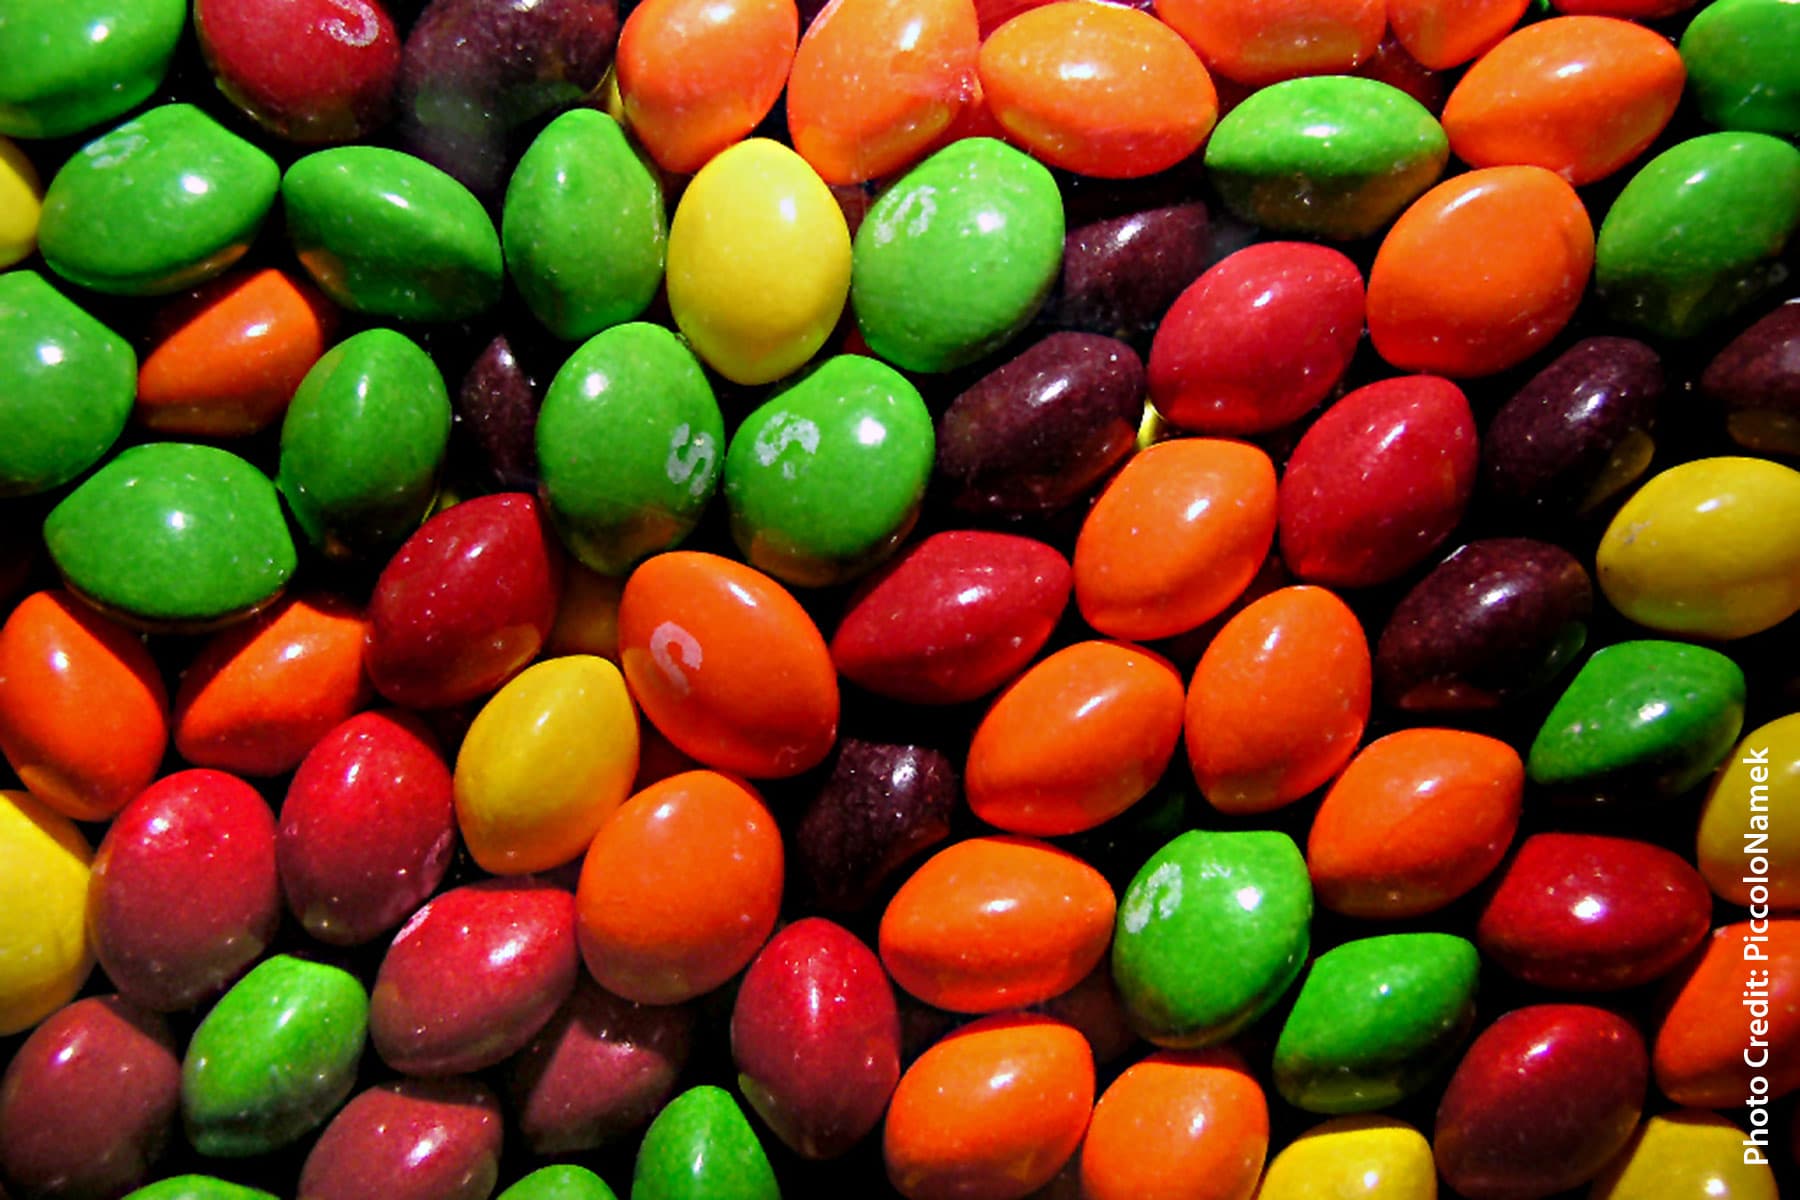 Lawsuit Alleges Eating Skittles Poses a Safety Risk